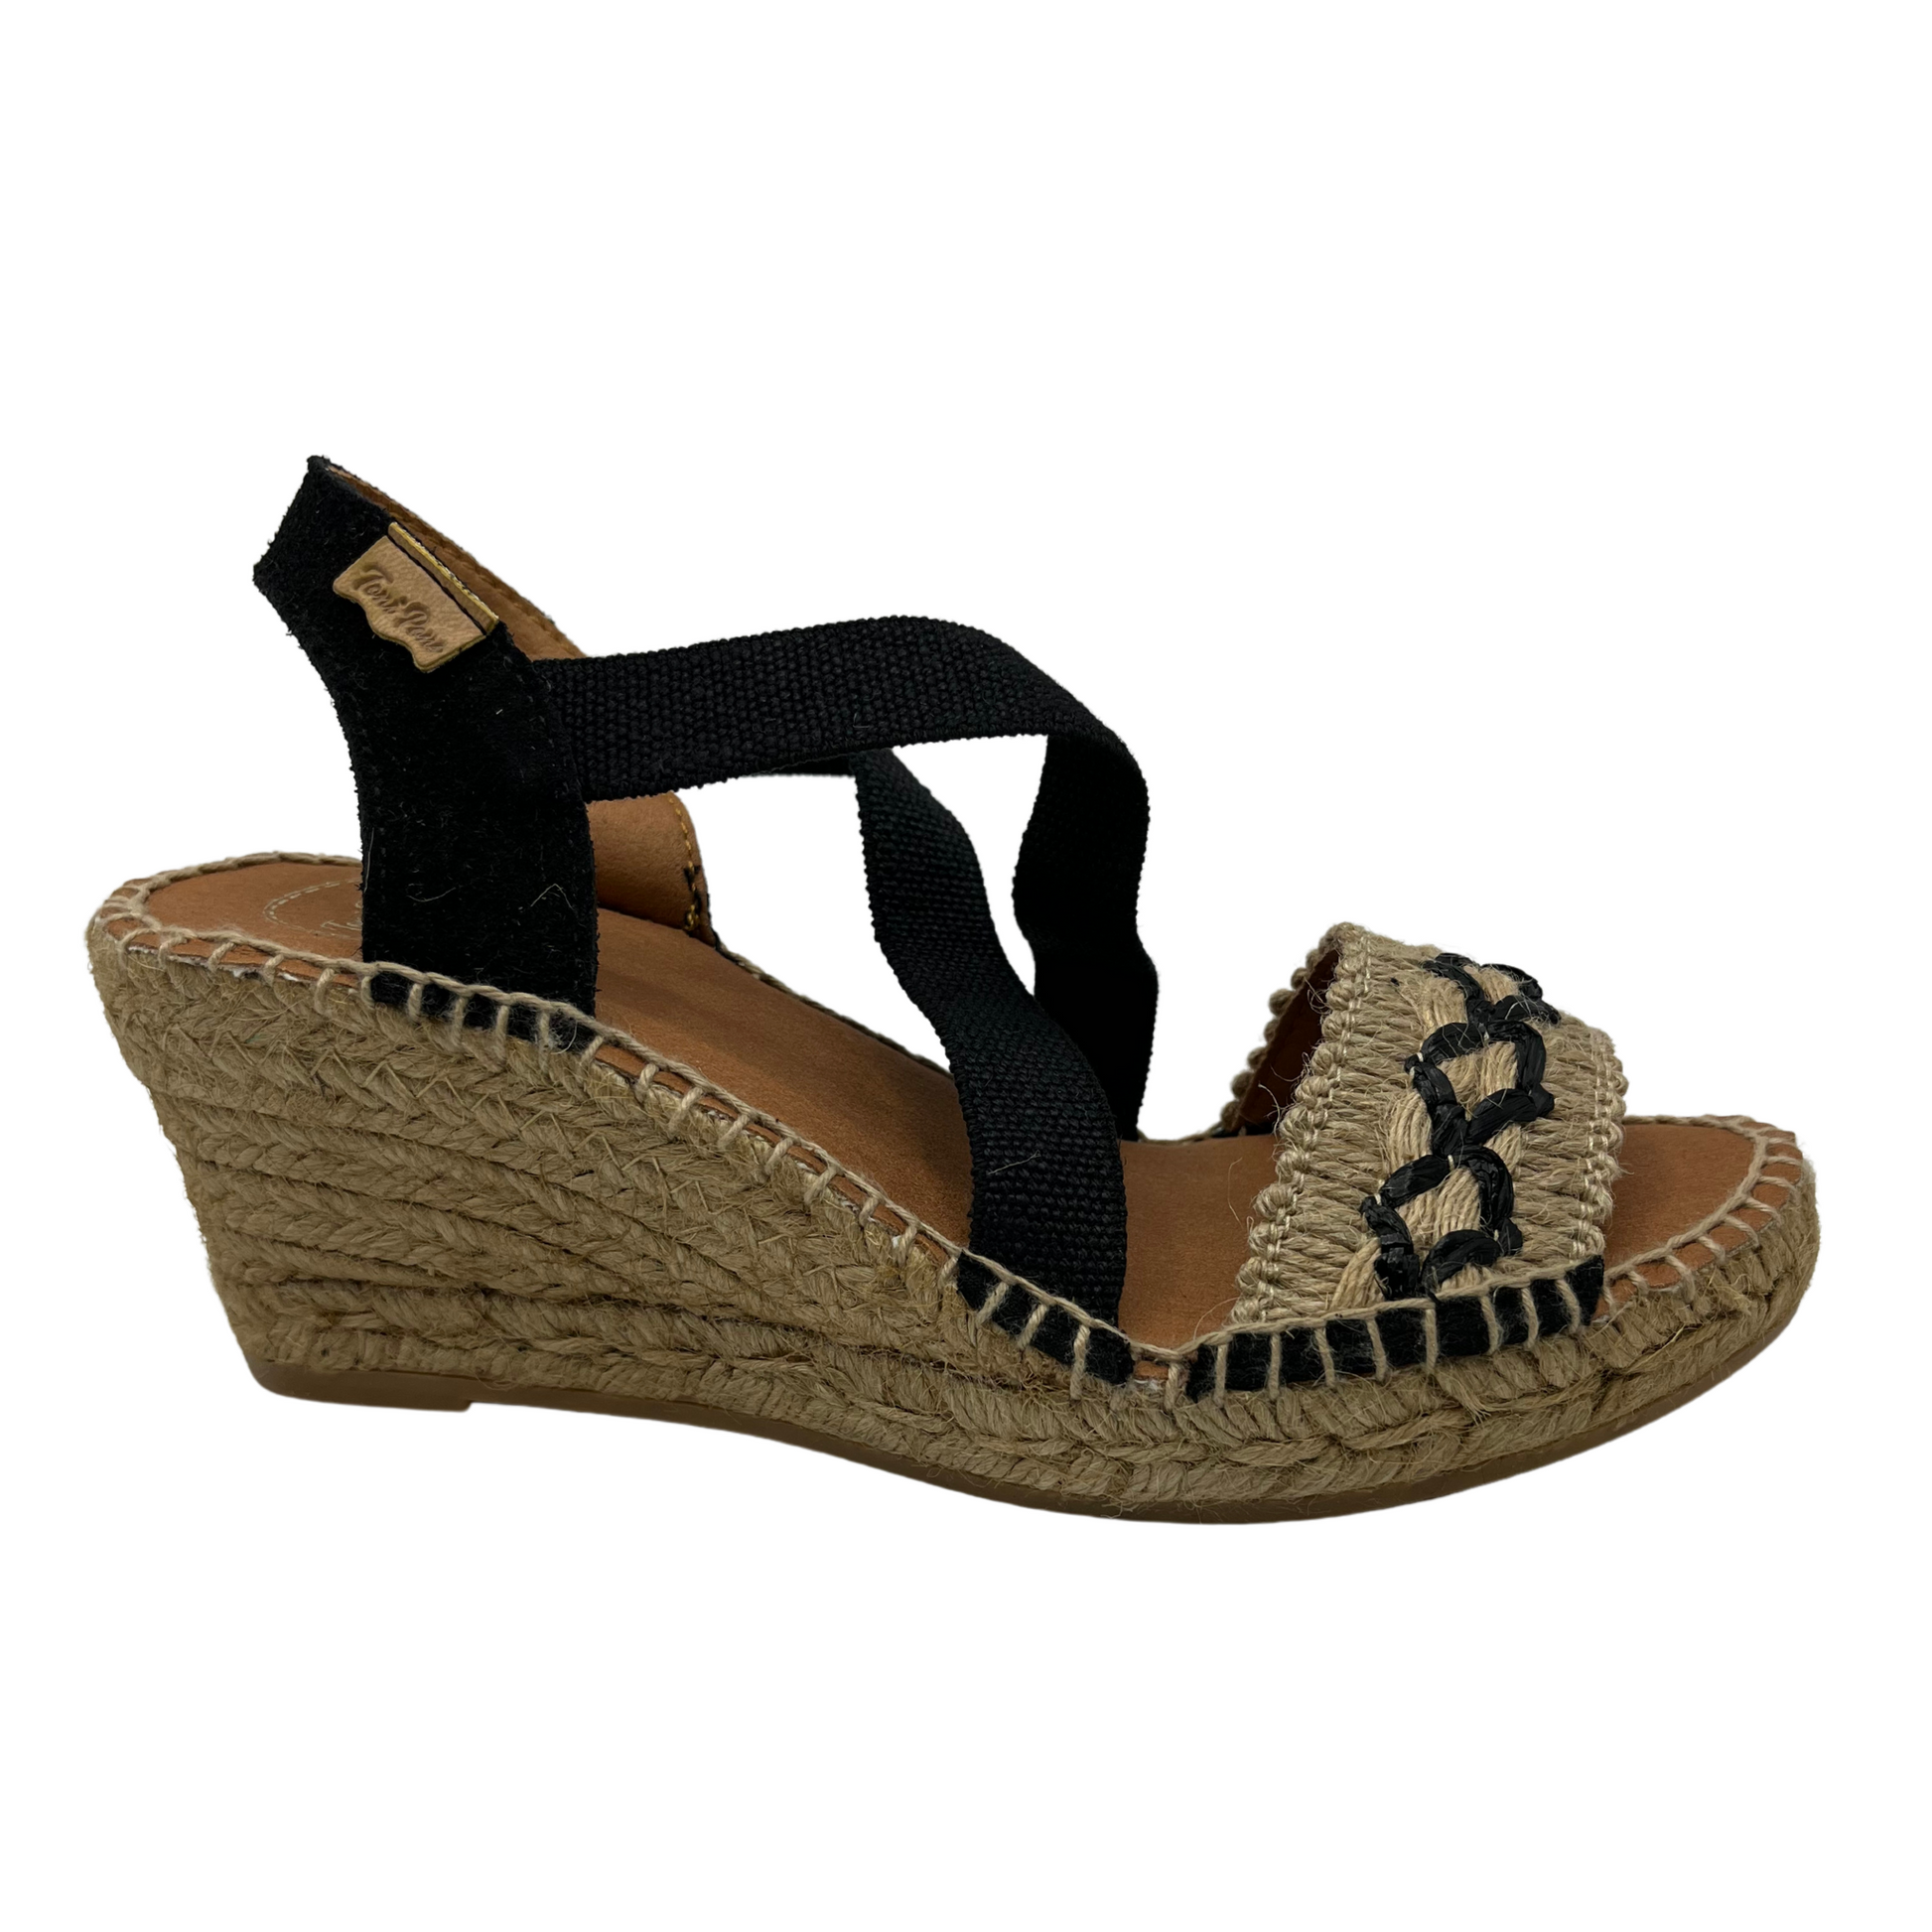 Right facing view of black and beige wedge sandal with X pattern across toe